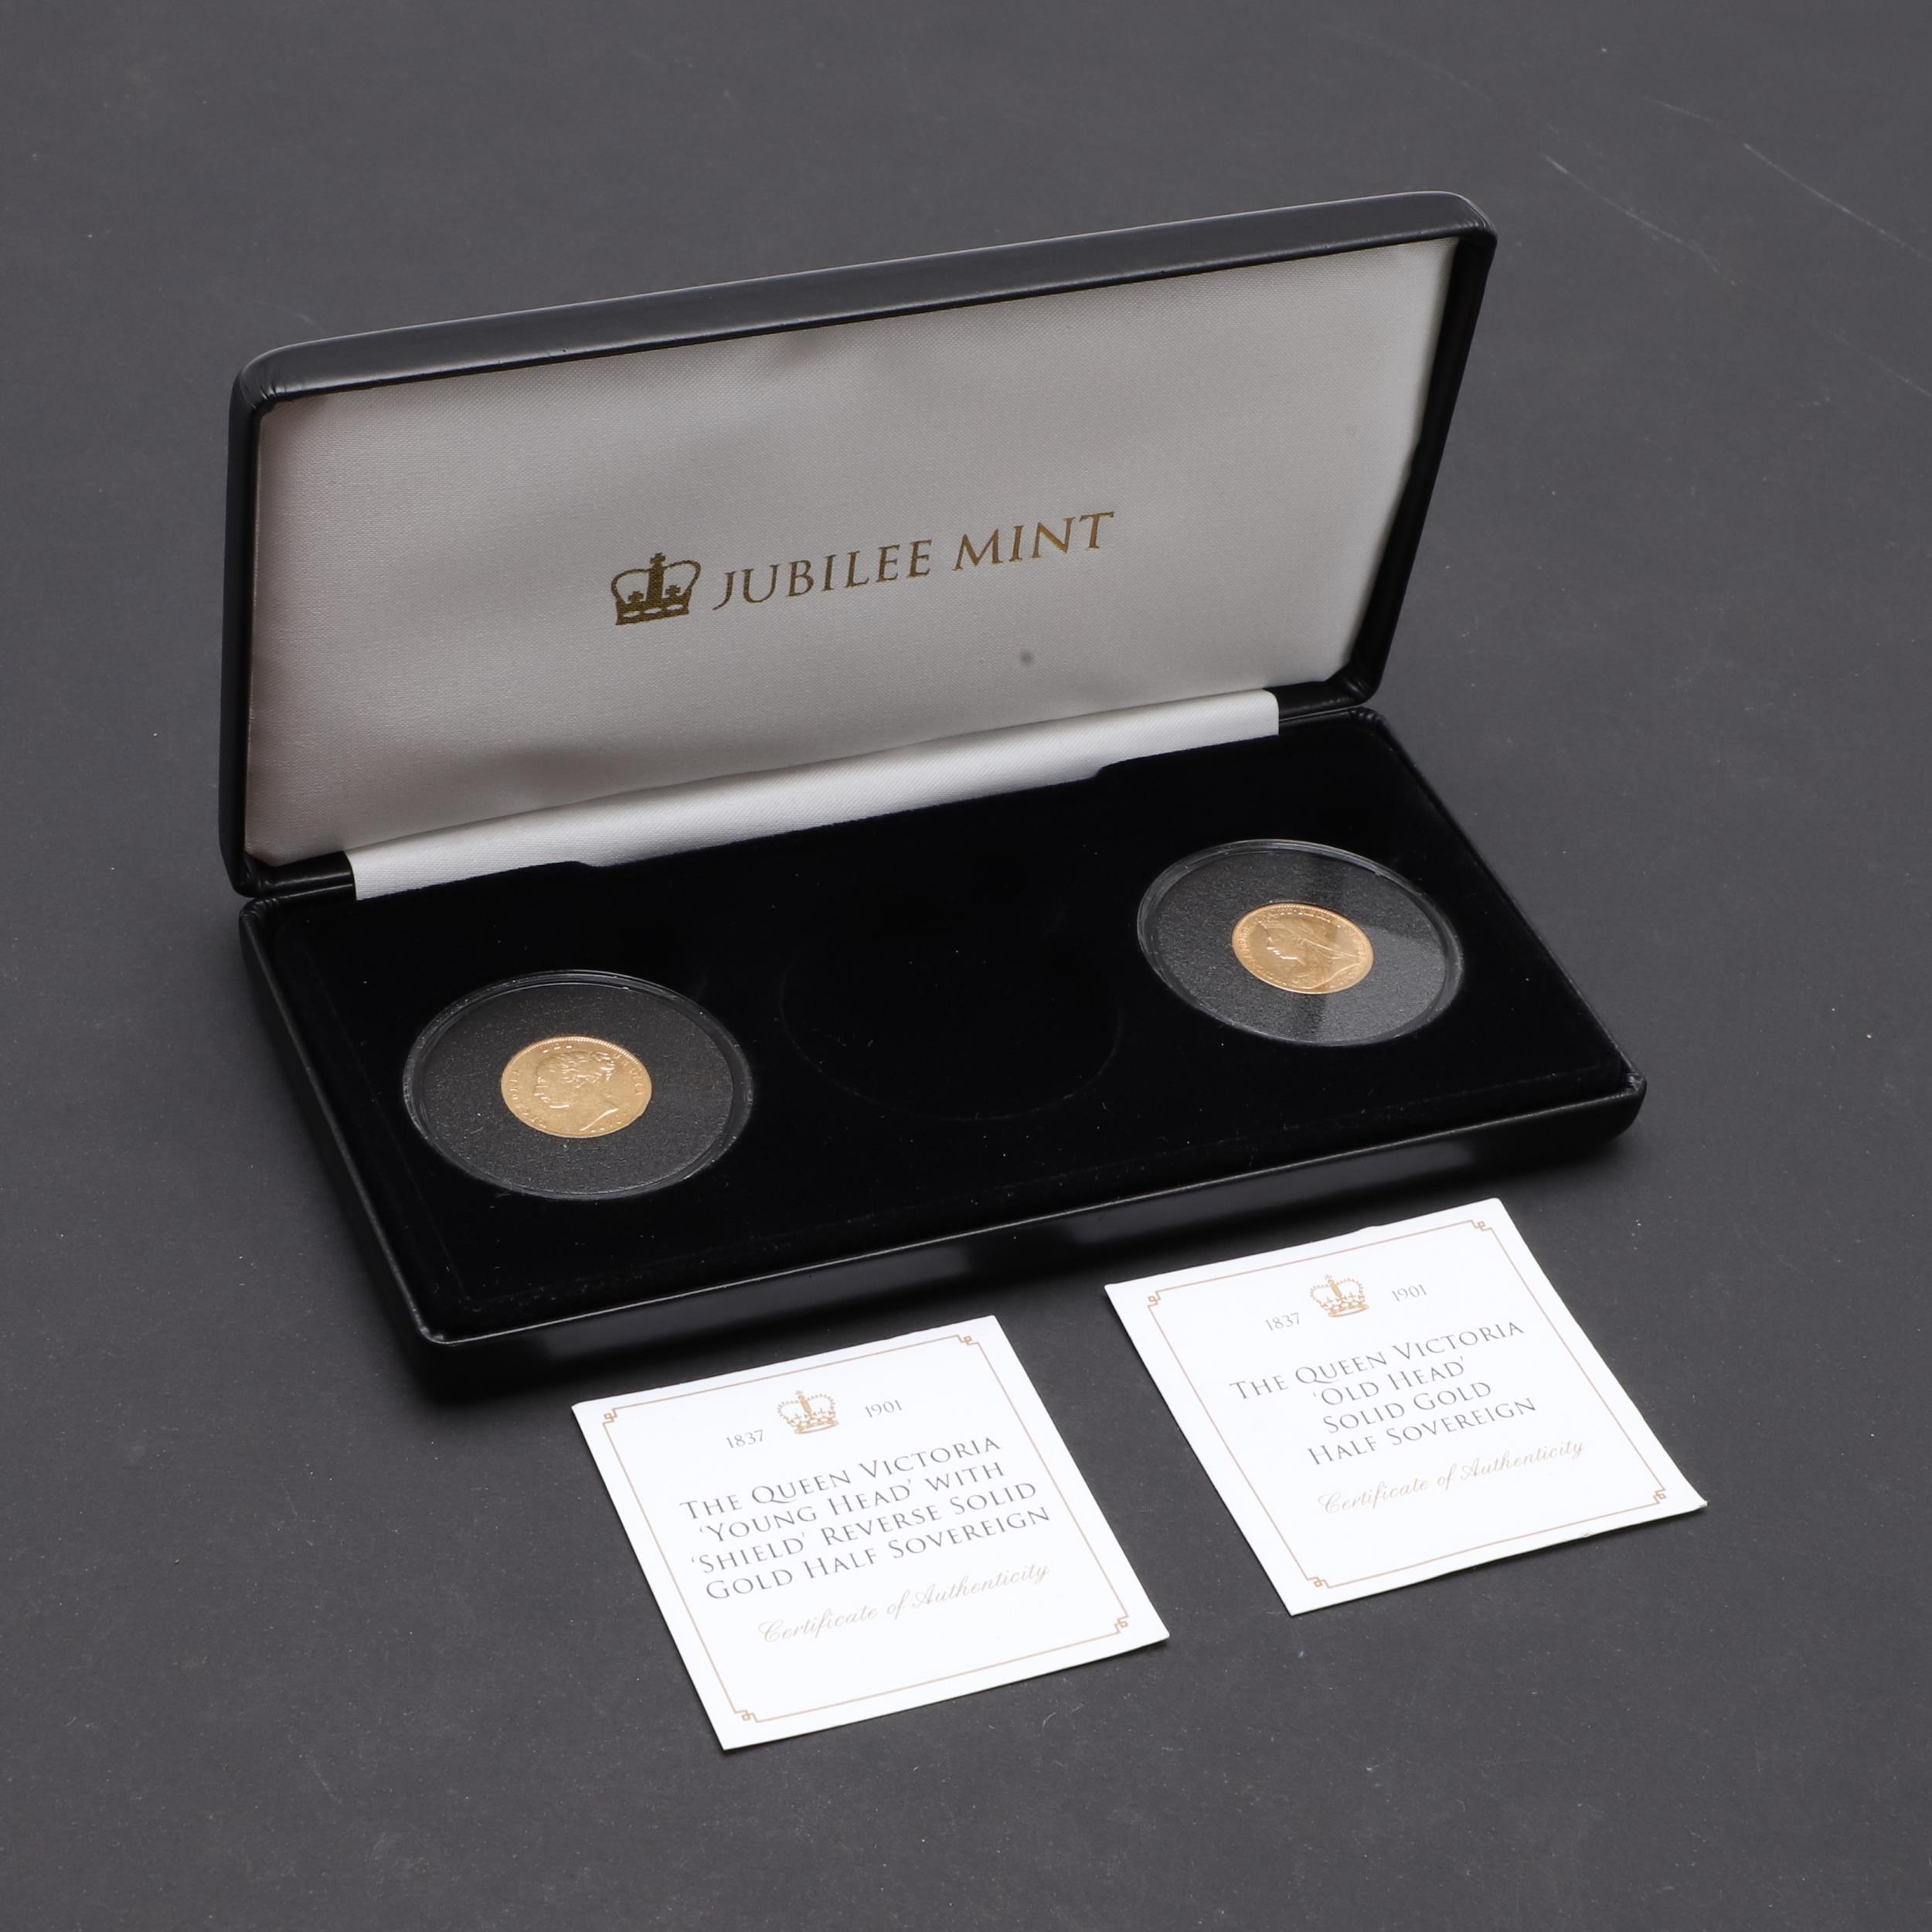 QUEEN VICTORIA, A PRESENTATION SET OF TWO HALF SOVEREIGNS, 1876 AND 1900.